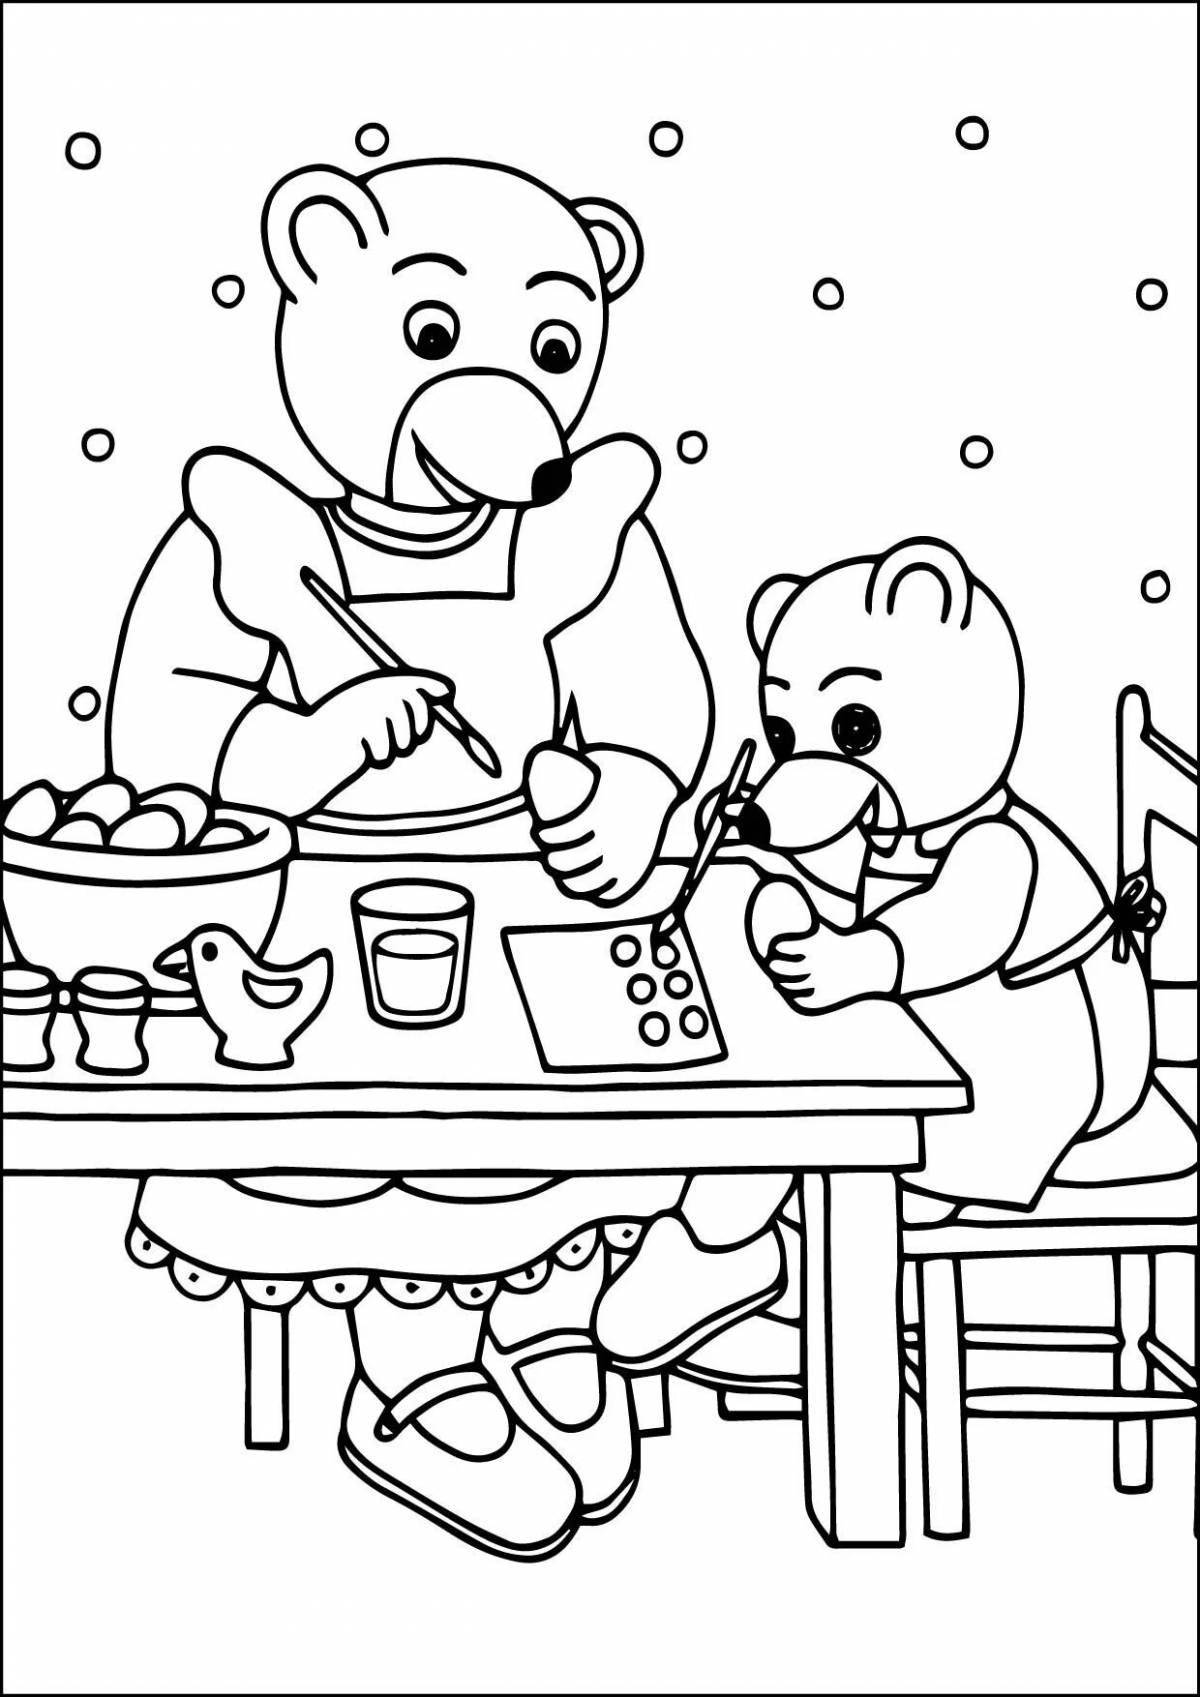 3 funny bears coloring book for kids